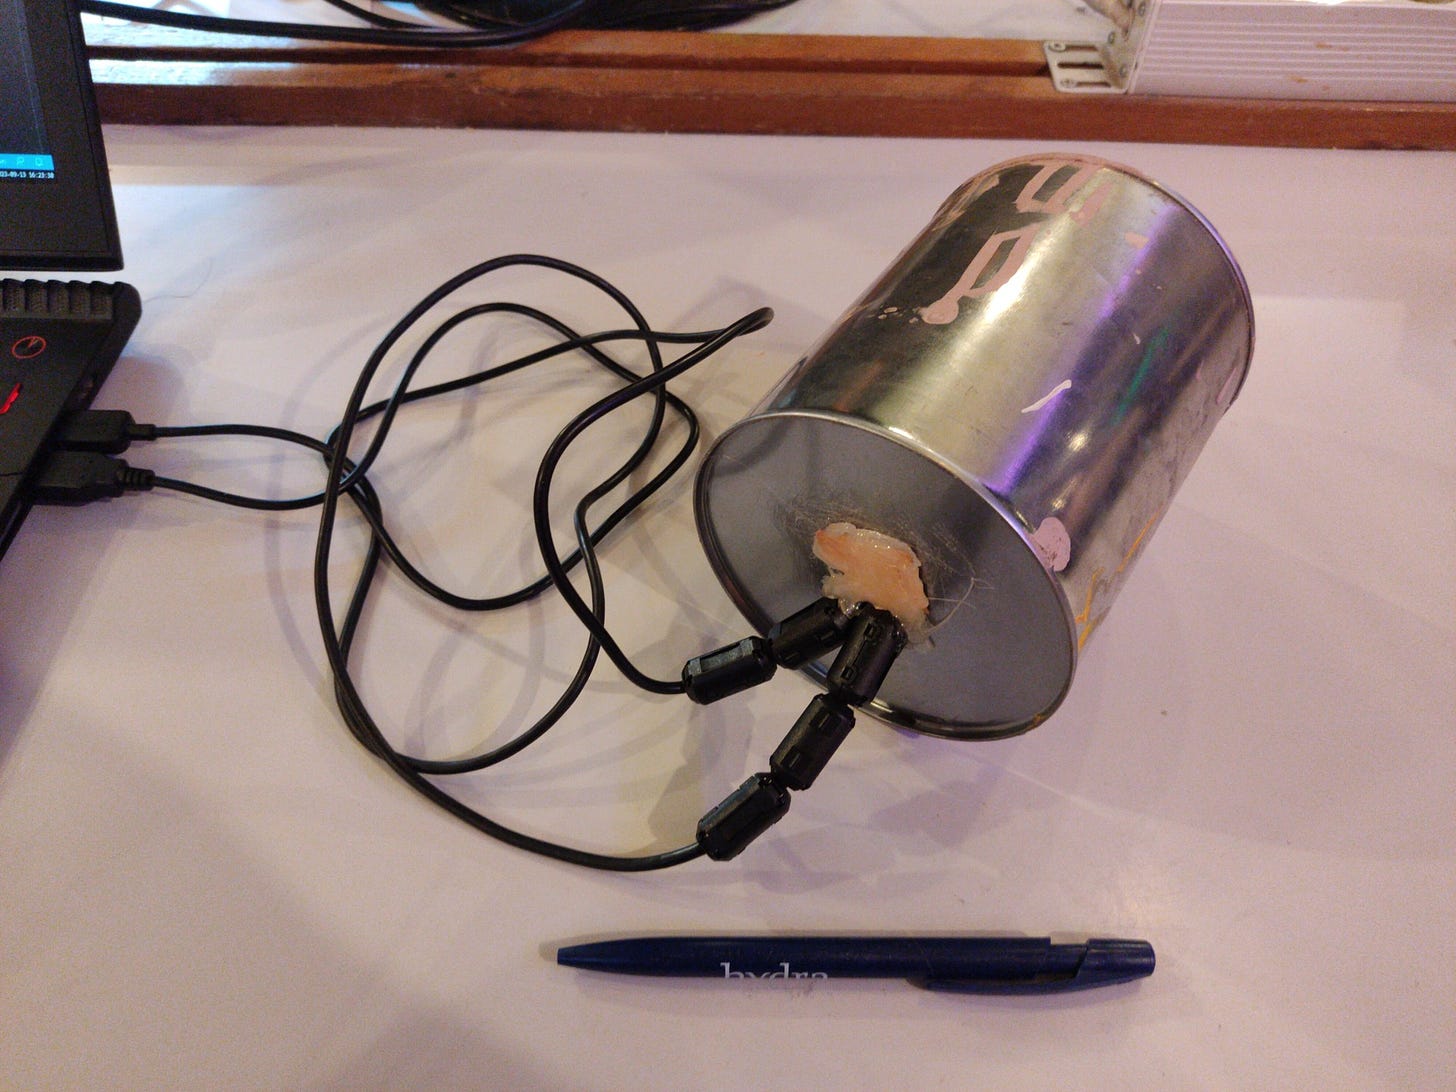 Faraday cage made from a paint tin, with copper tape to close the hole for the USB connectors, and ferrite chokes to reduce the RF leaking in